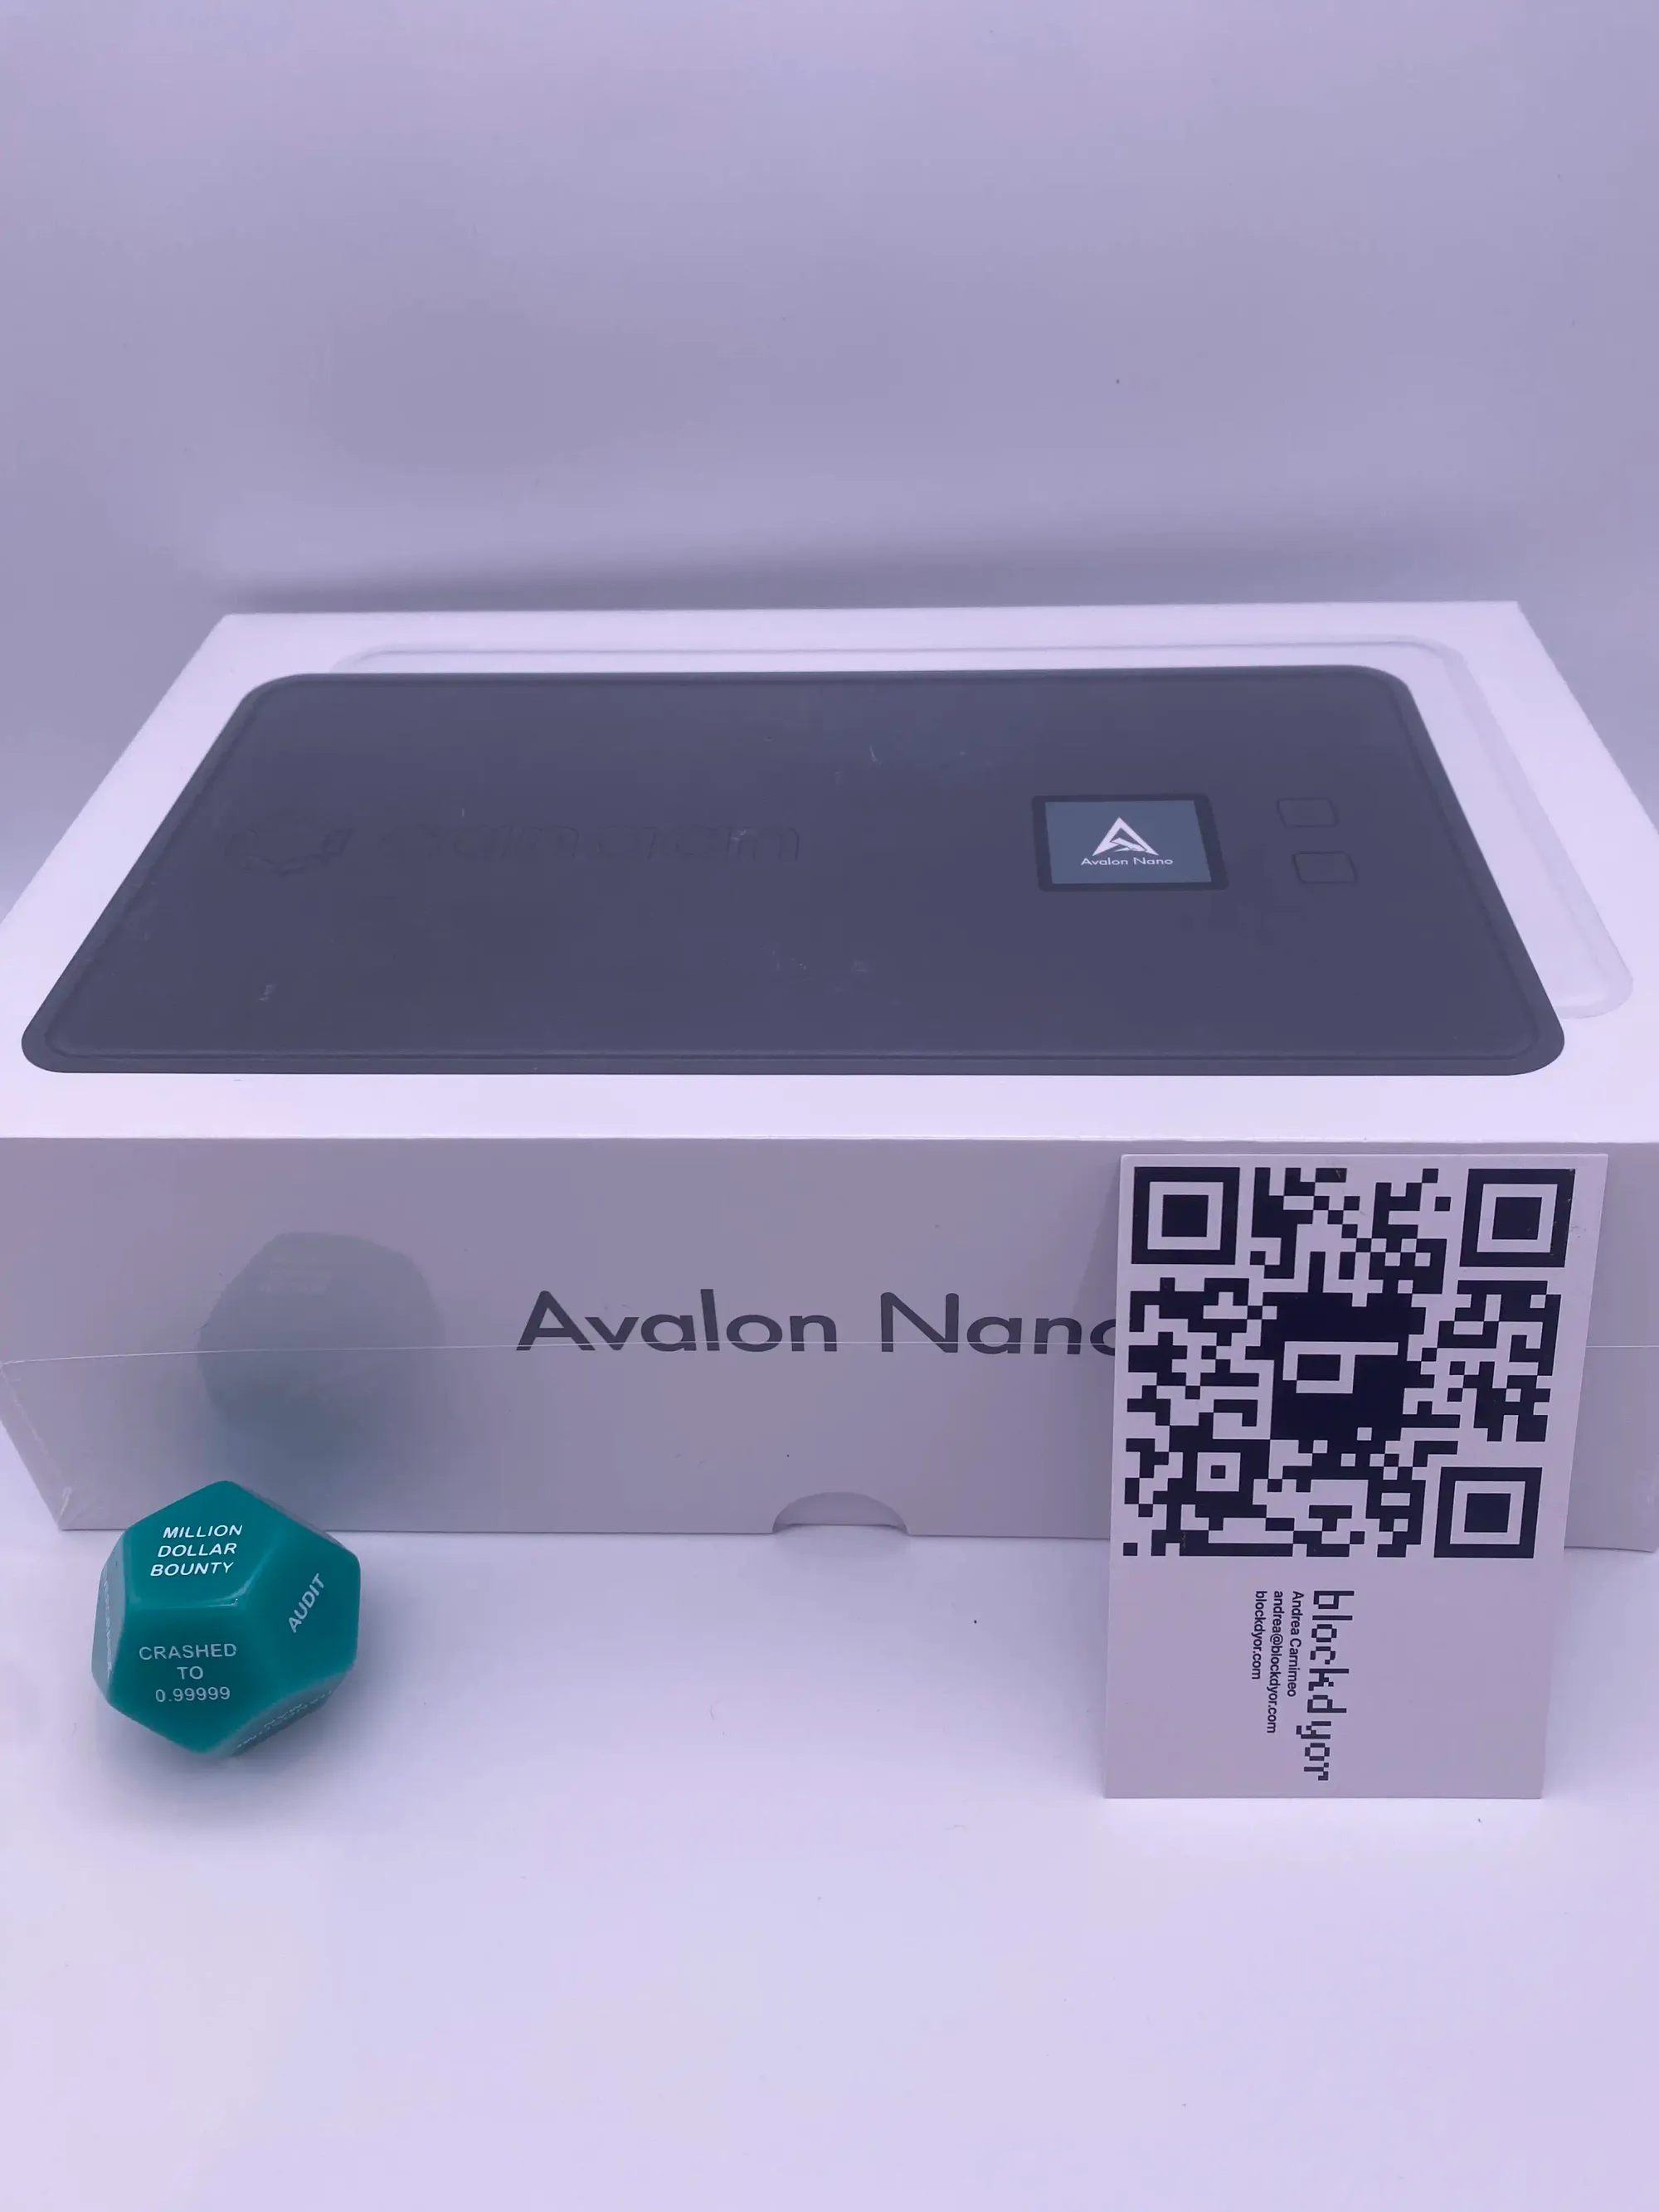 Canaan Avalon Nano 3 Unboxing Step 2